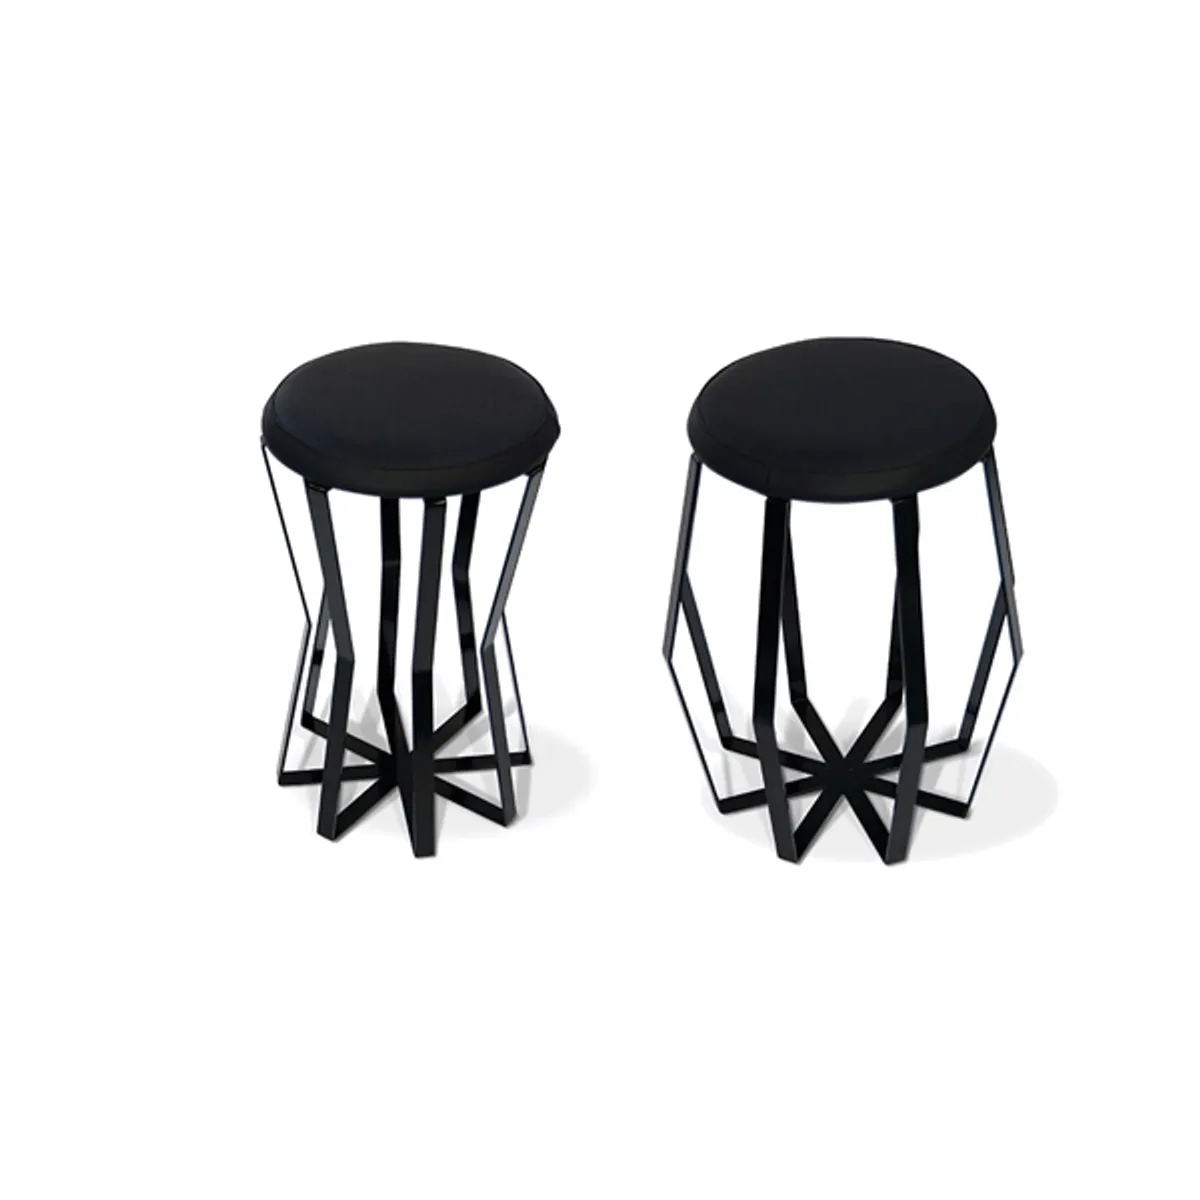 Asterisk stools Inside Out Contracts